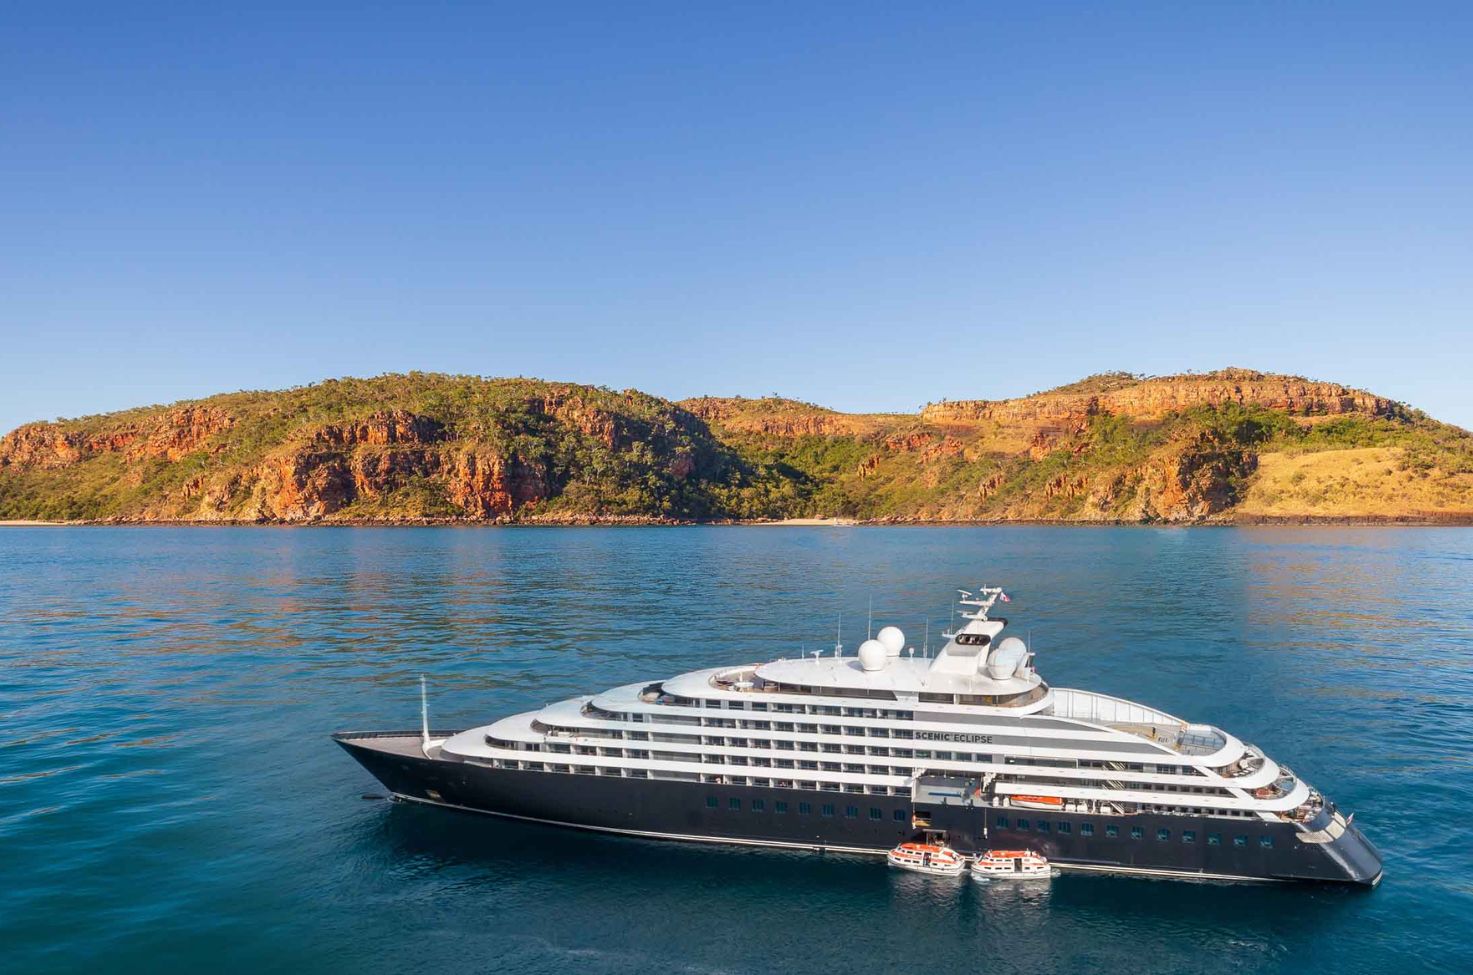 Scenic Eclipse at the Prince Frederick Harbour in the Kimberley